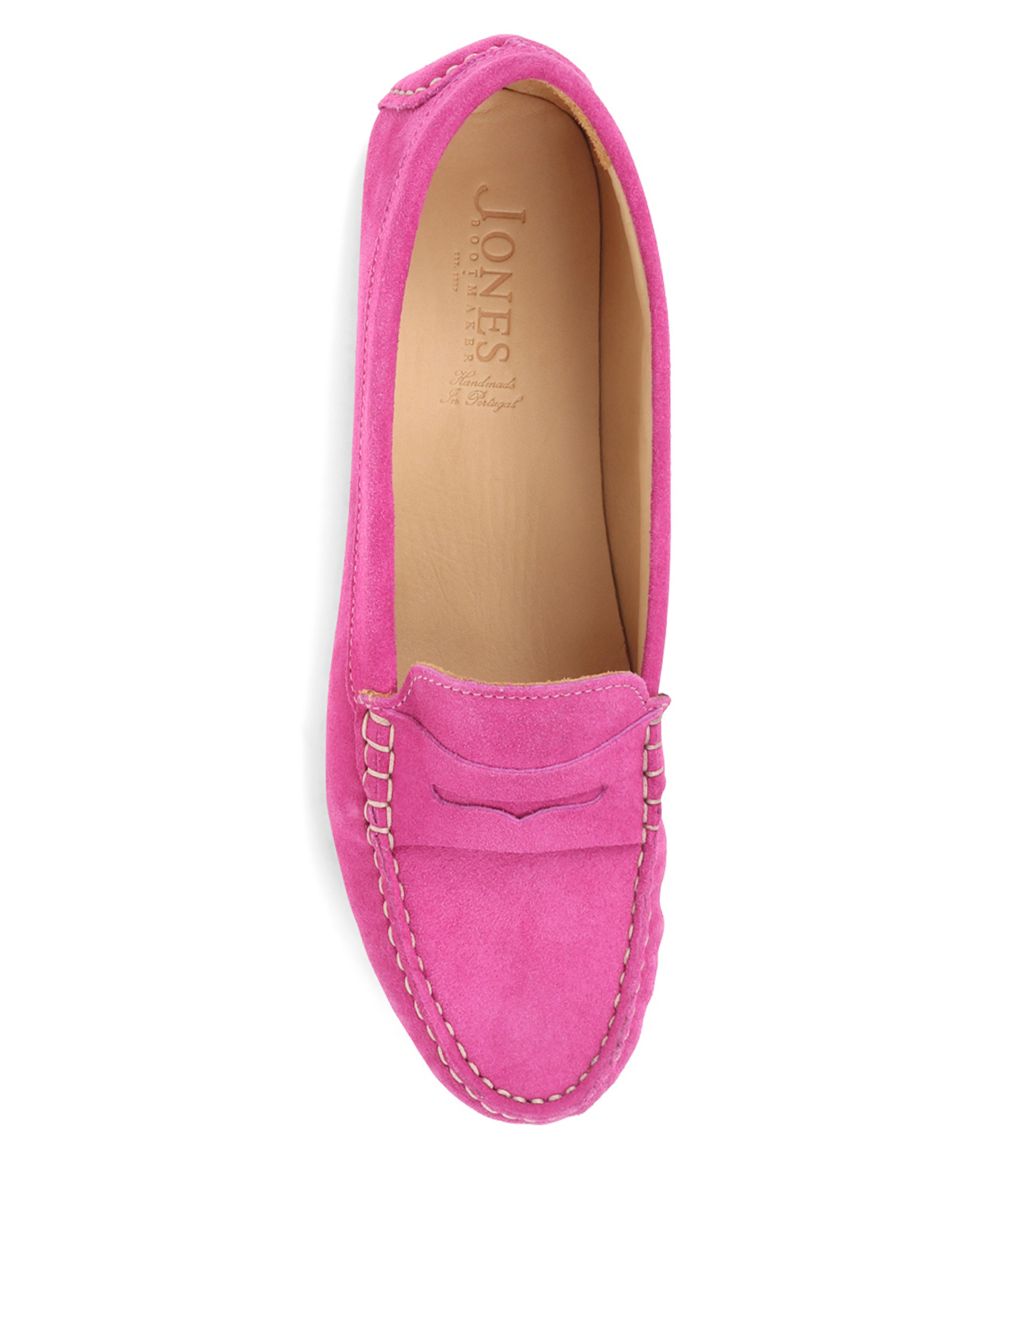 Suede Slip On Loafers image 5